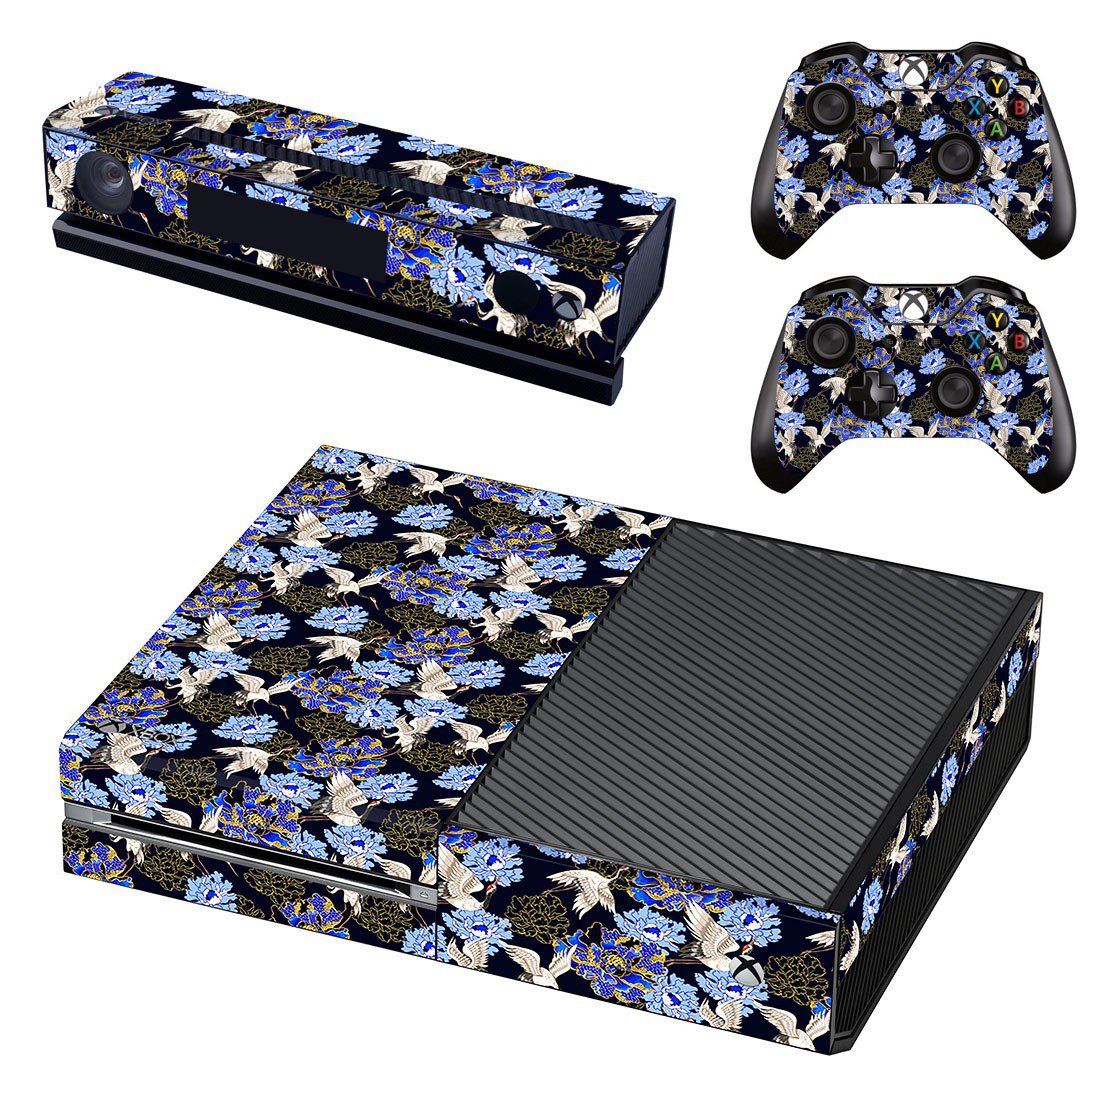 Xbox One And Controllers Skin Sticker - Colors Leaves